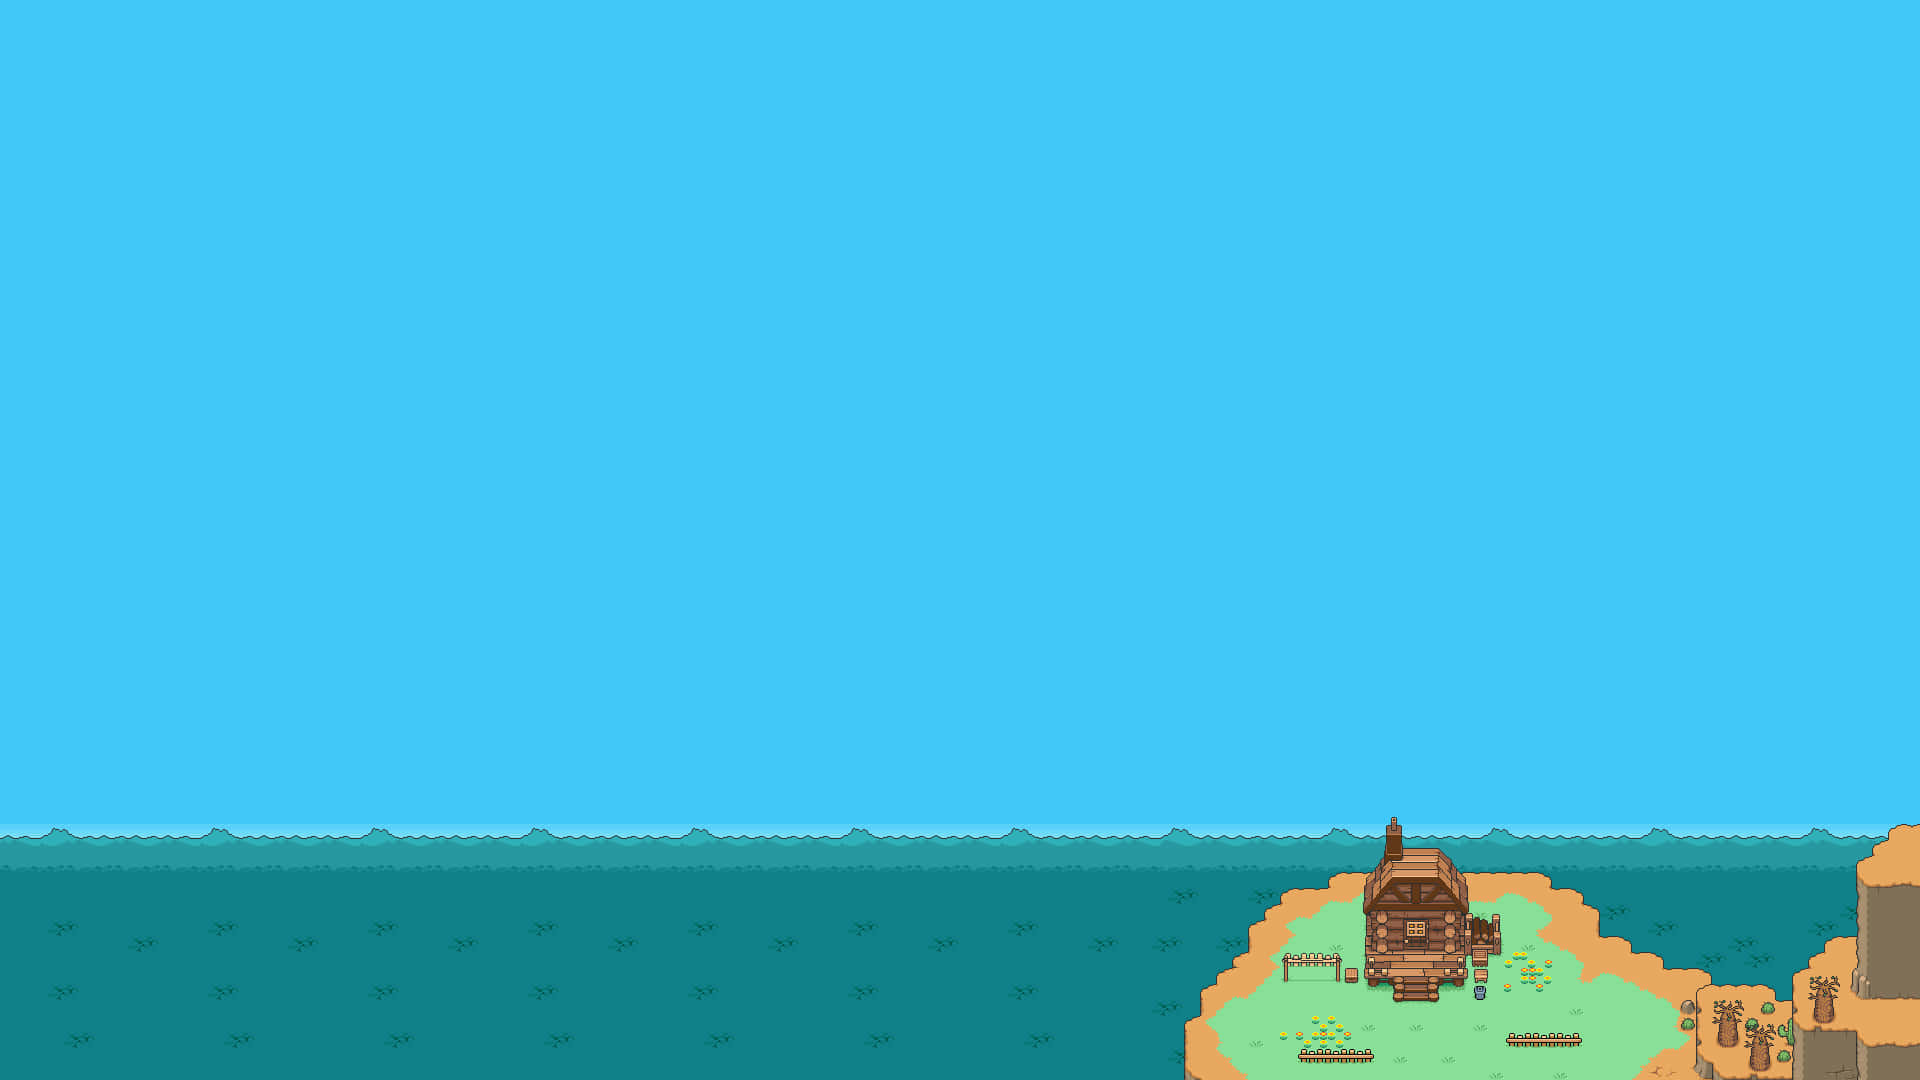 A Pixelated Image Of A Small Island With A Boat On It Wallpaper